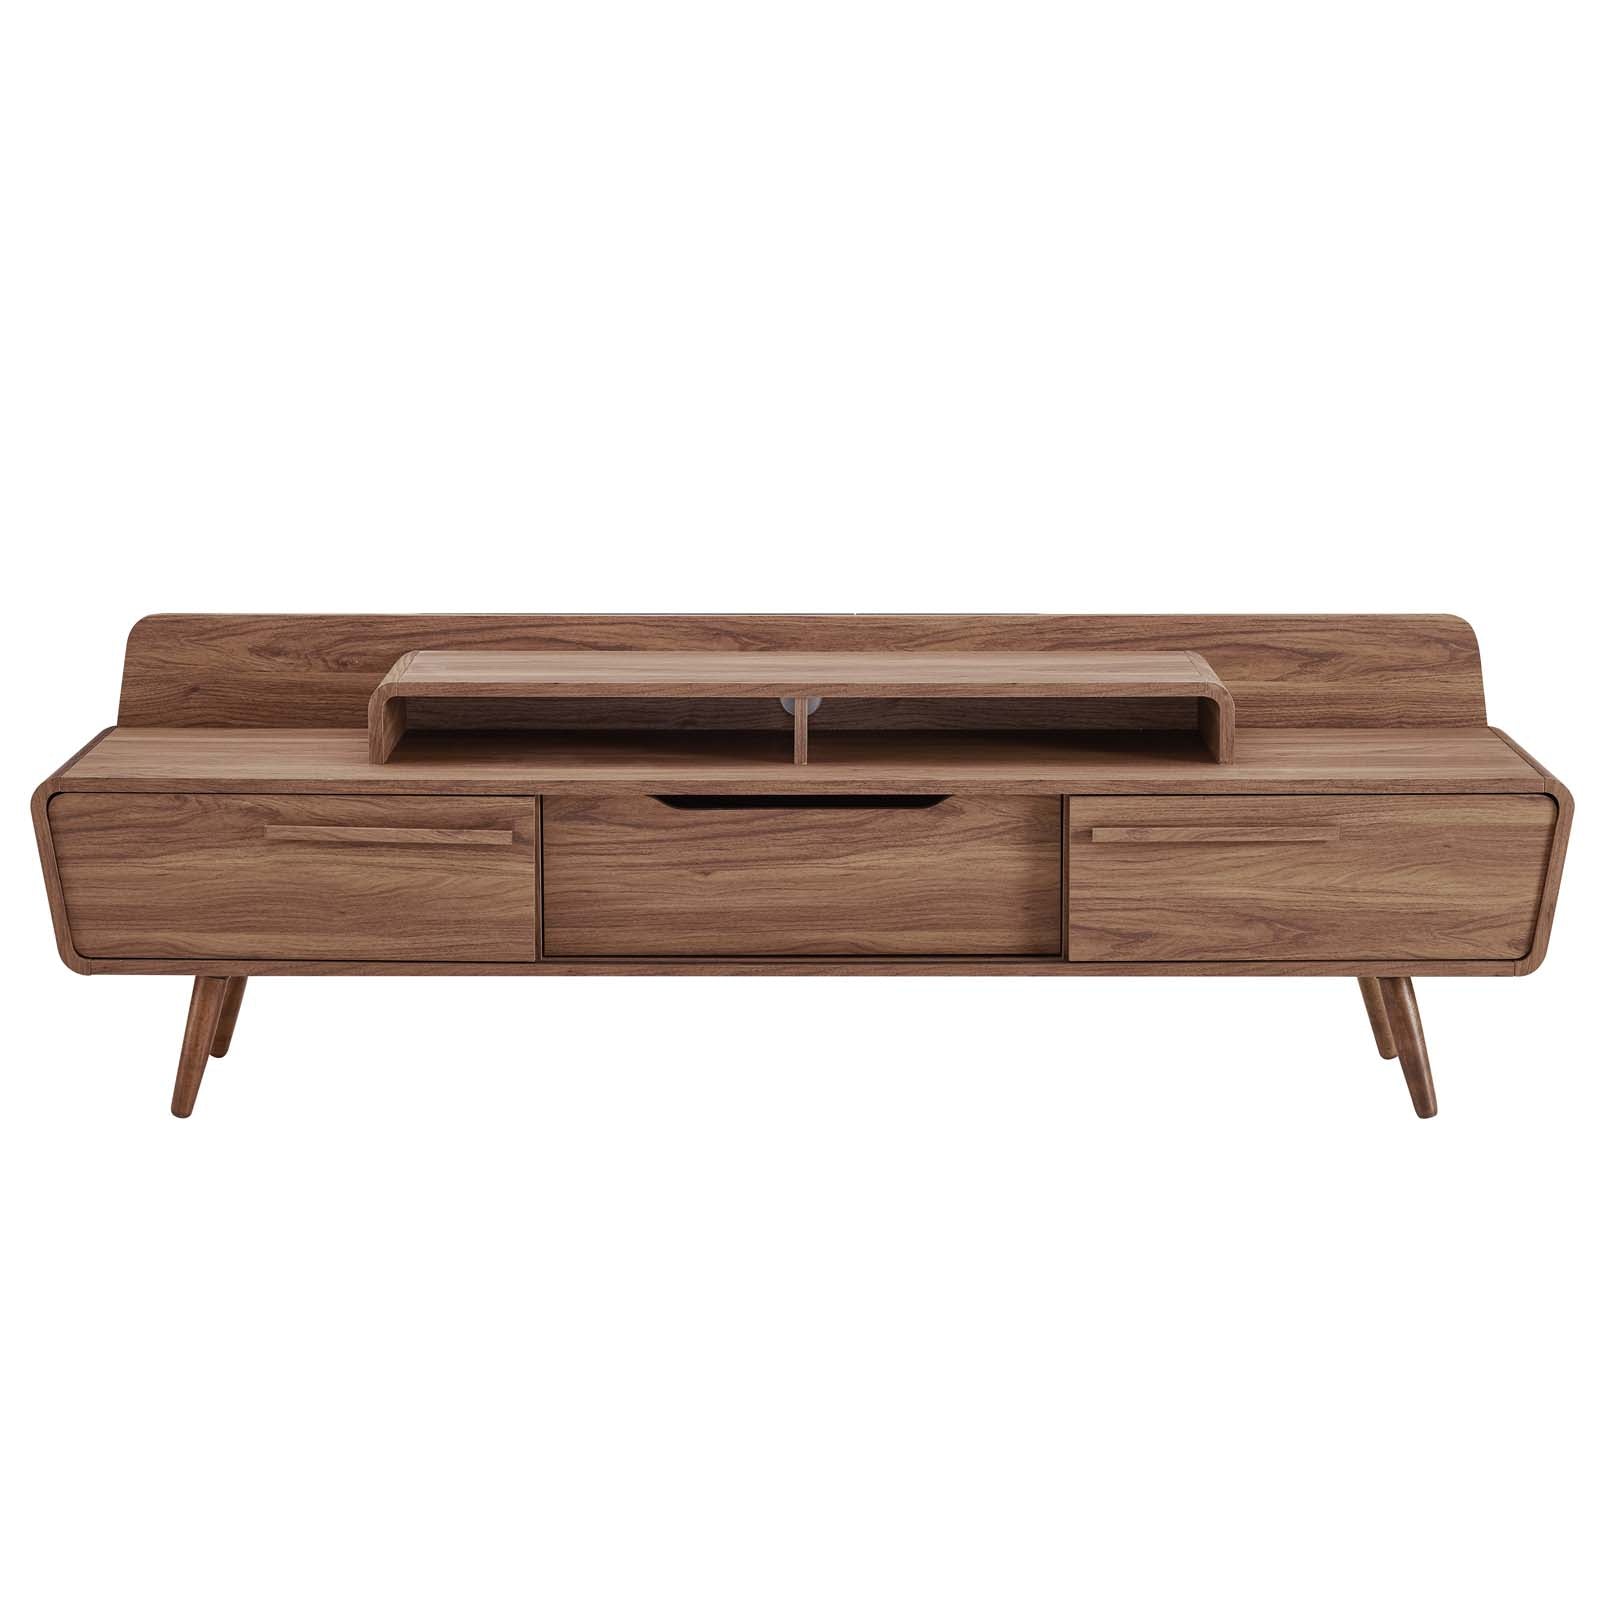 Omnistand 74" TV Stand - East Shore Modern Home Furnishings